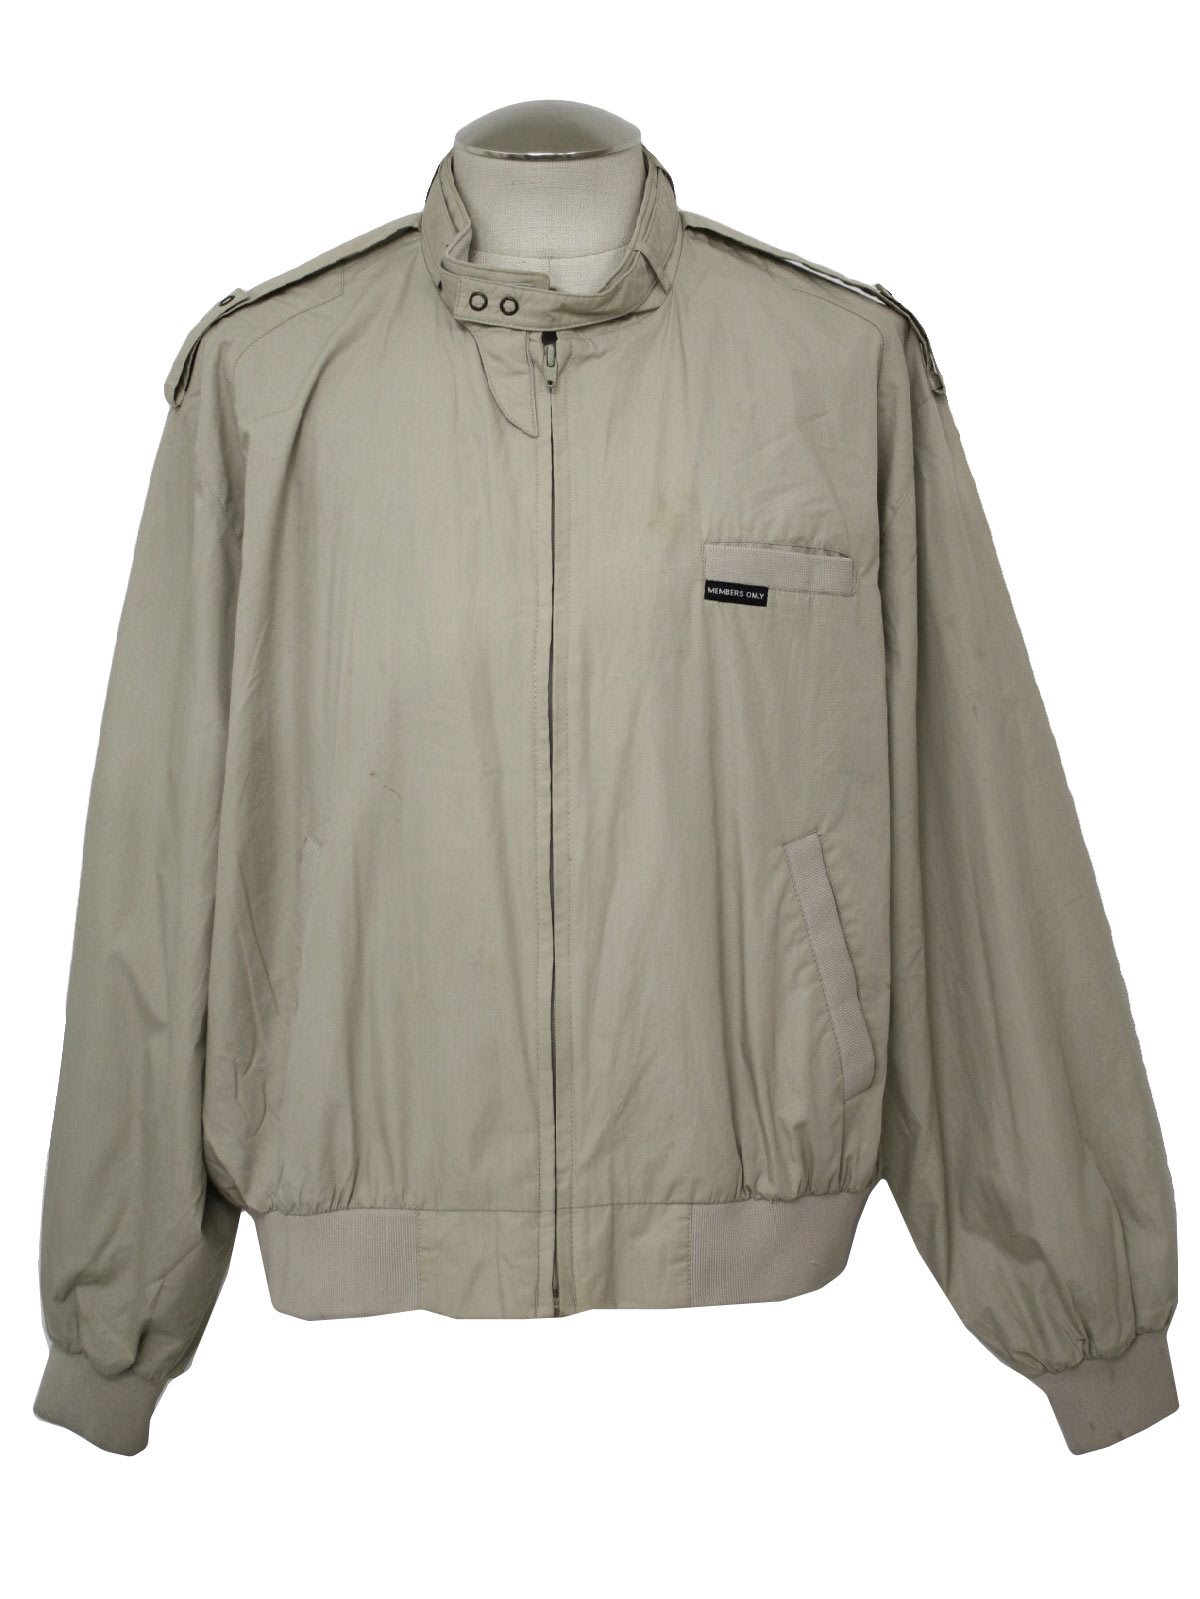 Retro 1980s Jacket: 80s -Members Only- Mens beige jacket, with an outer ...